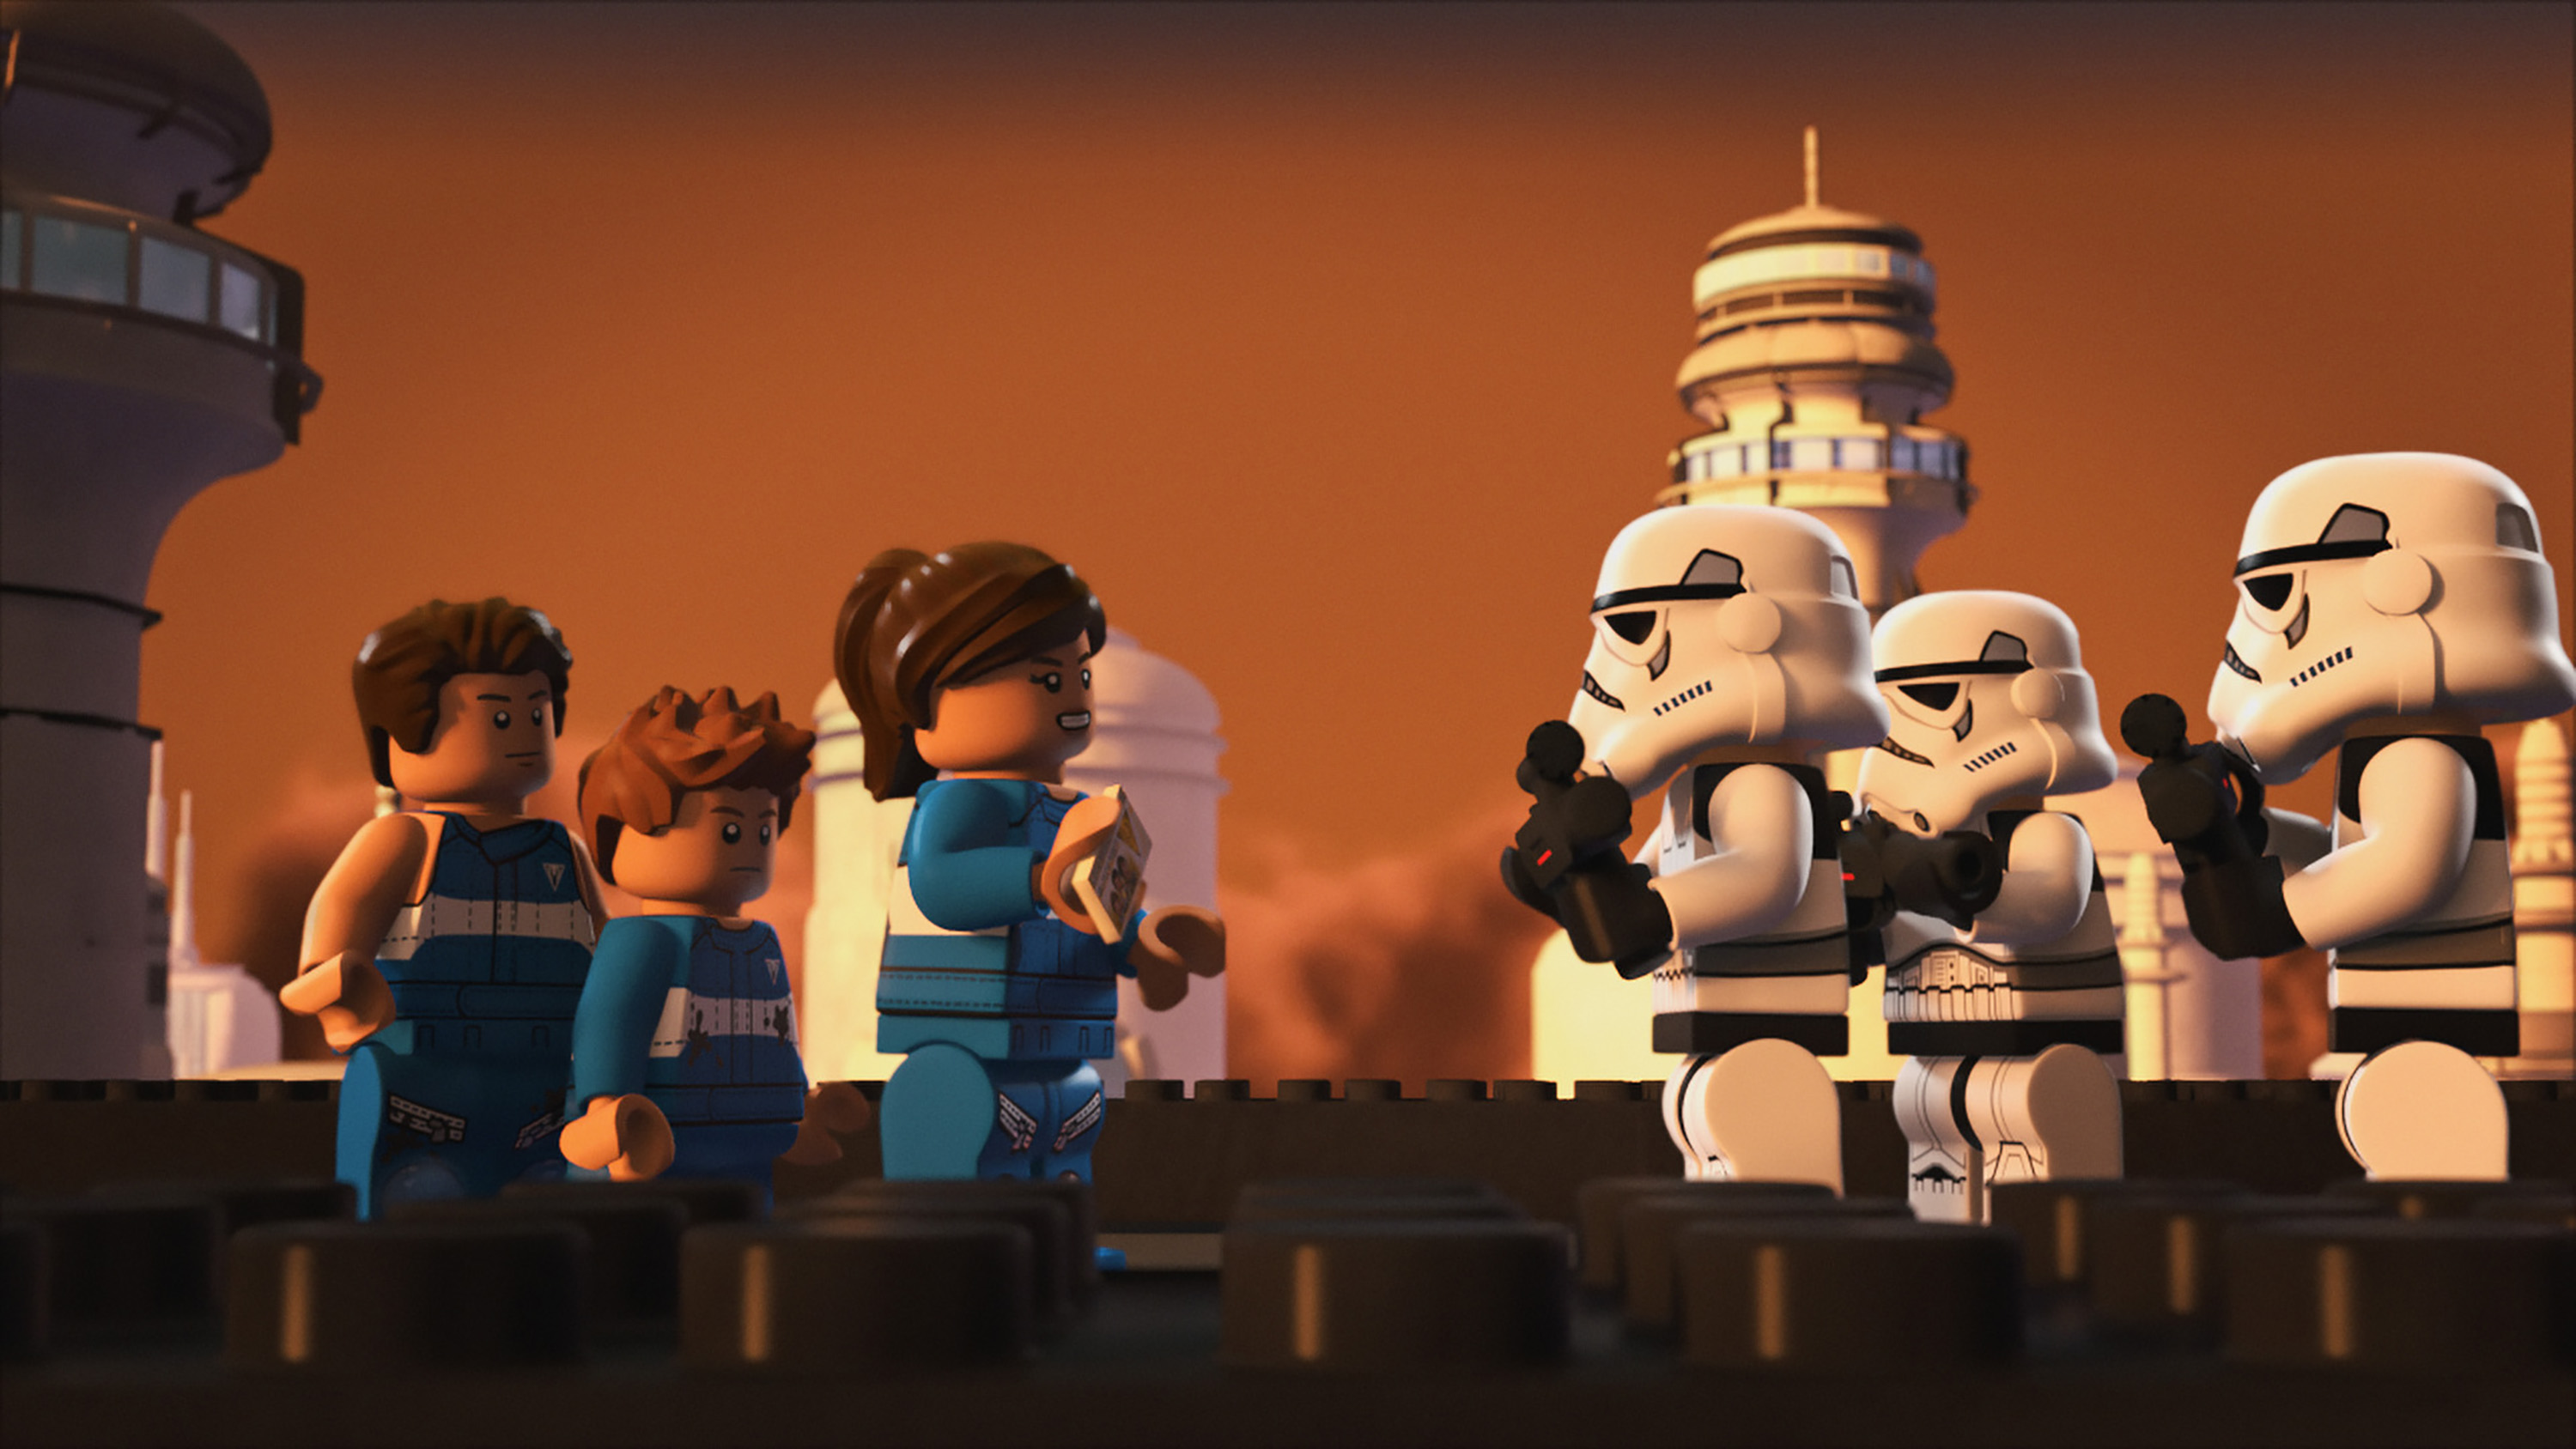 LEGO STAR WARS: THE FREEMAKER ADVENTURES - "The Lost Treasure of Cloud City" - A hunt for precious cargo brings the Freemakers to Cloud City. This episode of "LEGO Star Wars: The Freemaker Adventures" airs Thursday, June 23 (10:00 - 10:30 A.M. EDT) on Disney XD. (Disney XD).